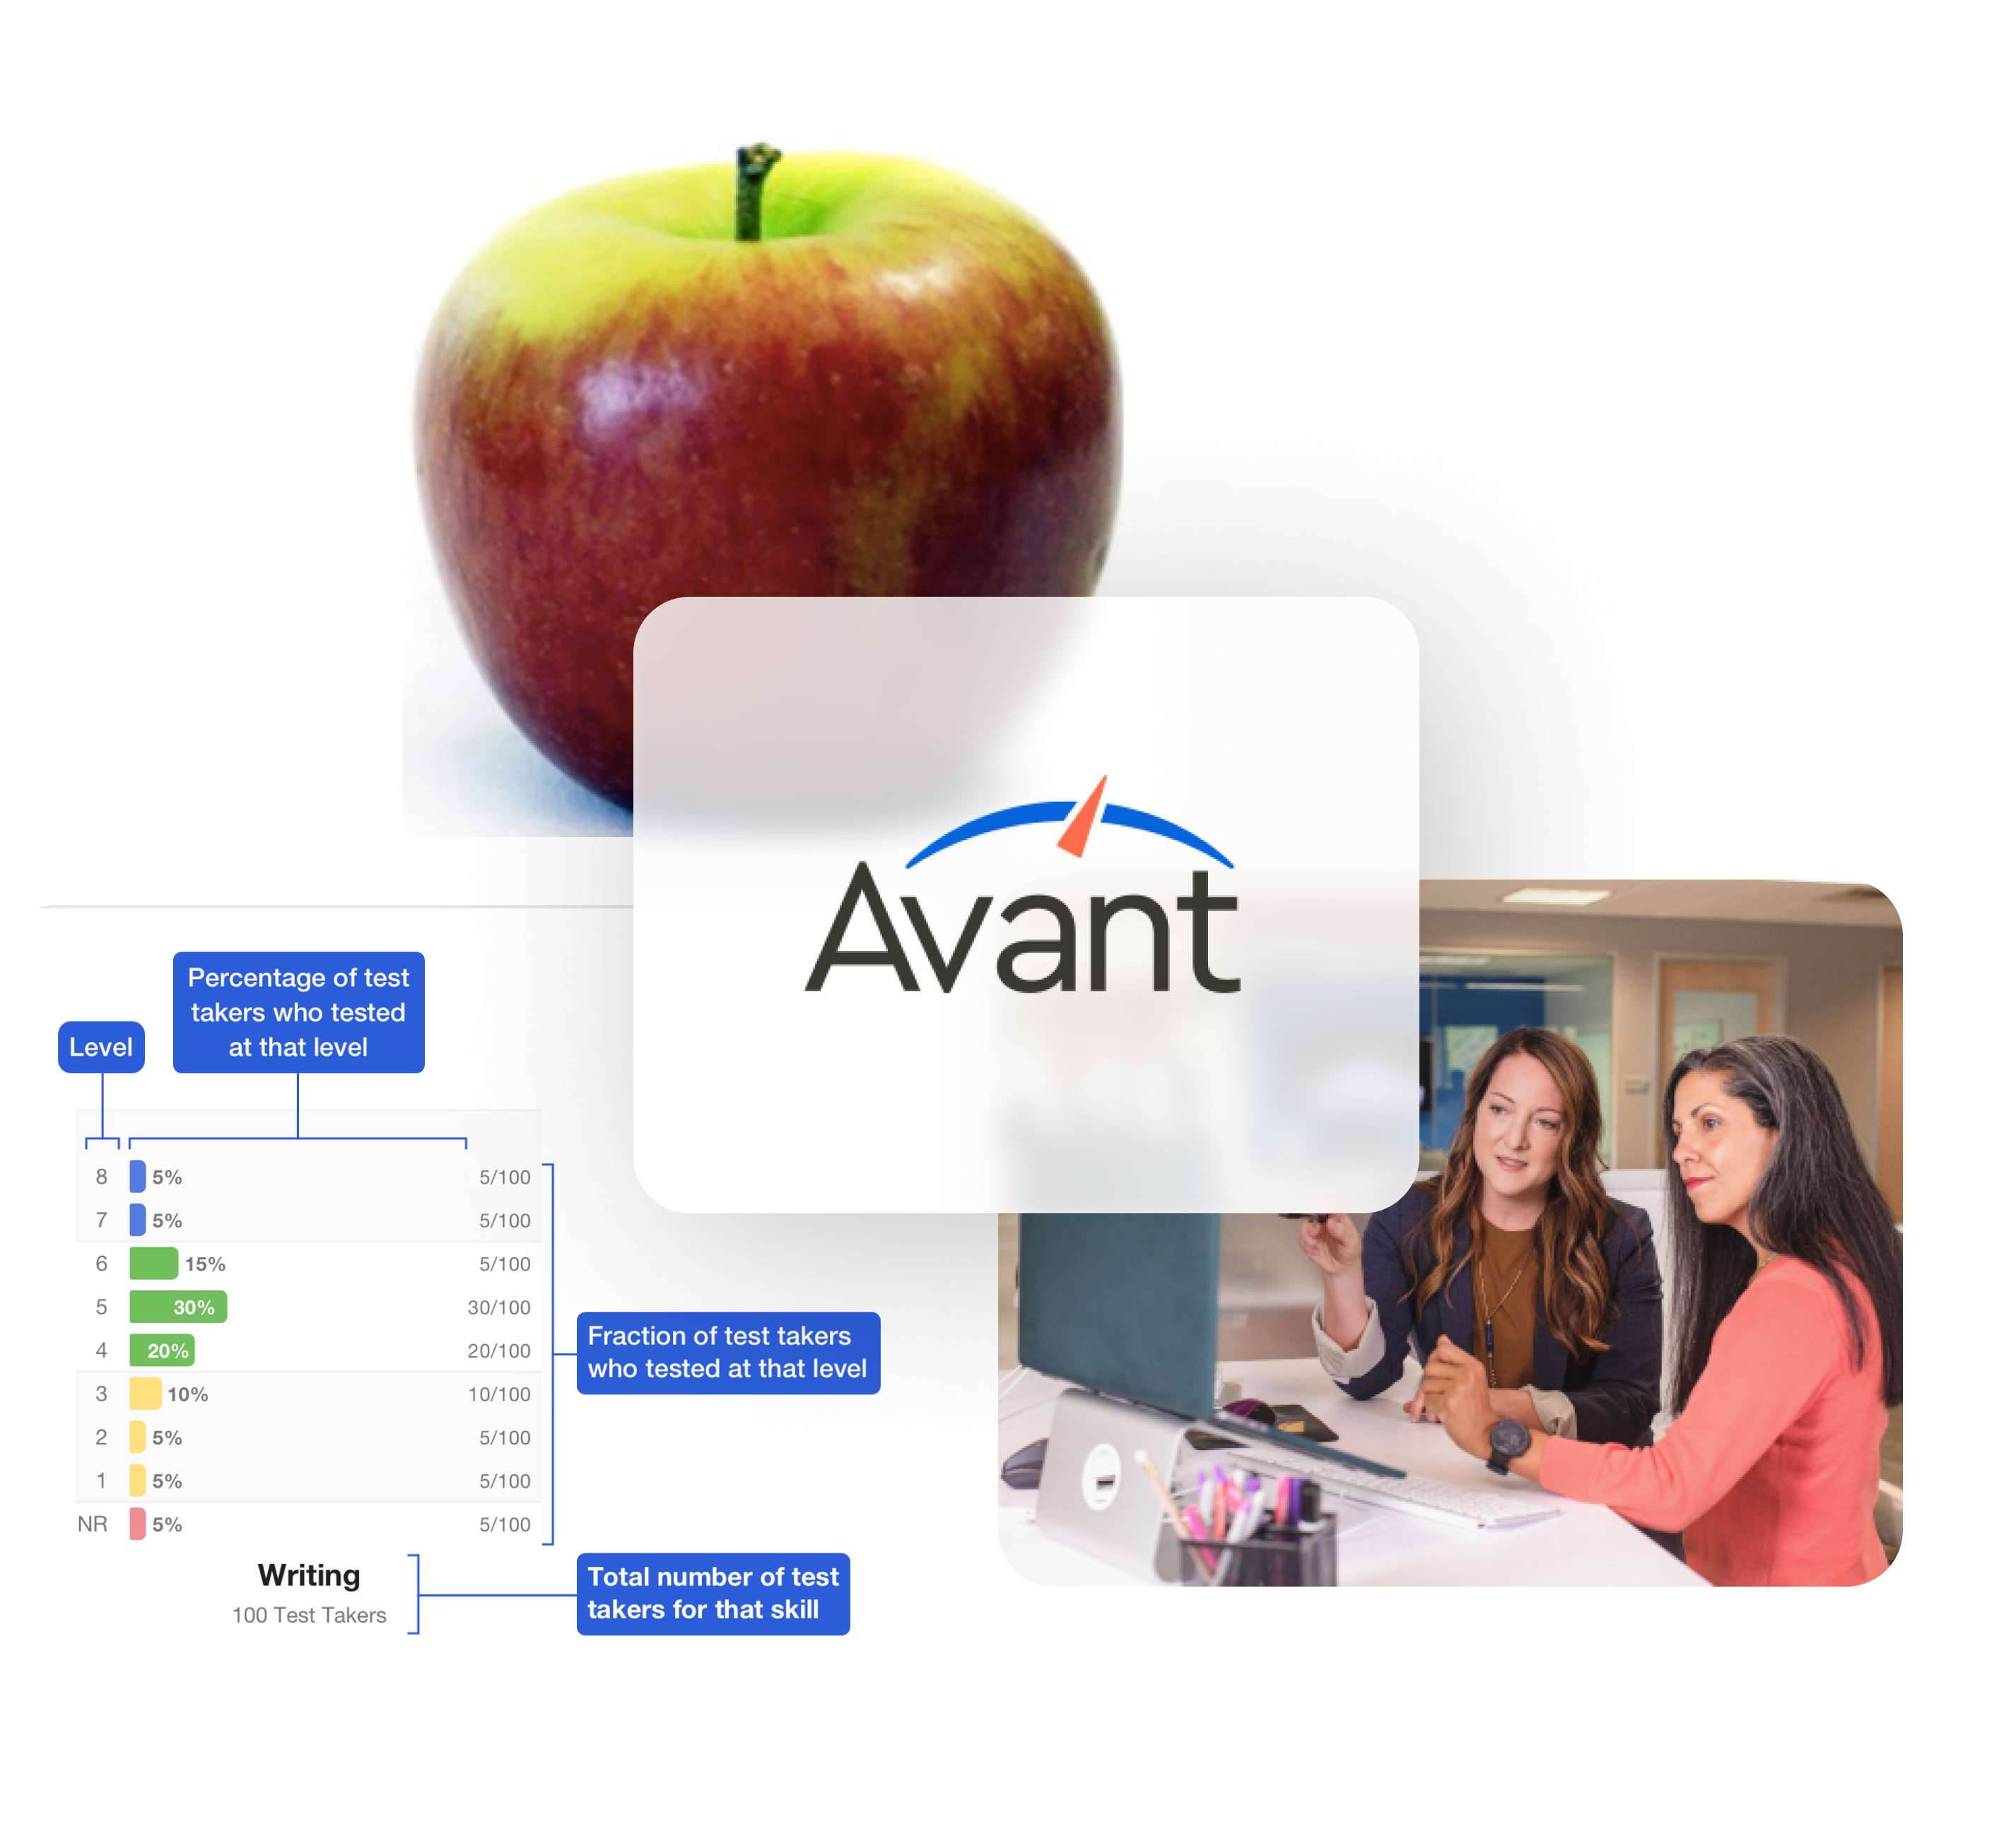 Collage of images showing progress screen from Avant Assessment platform, two women looking at a computer screen, a red apple, and the Avant logo.